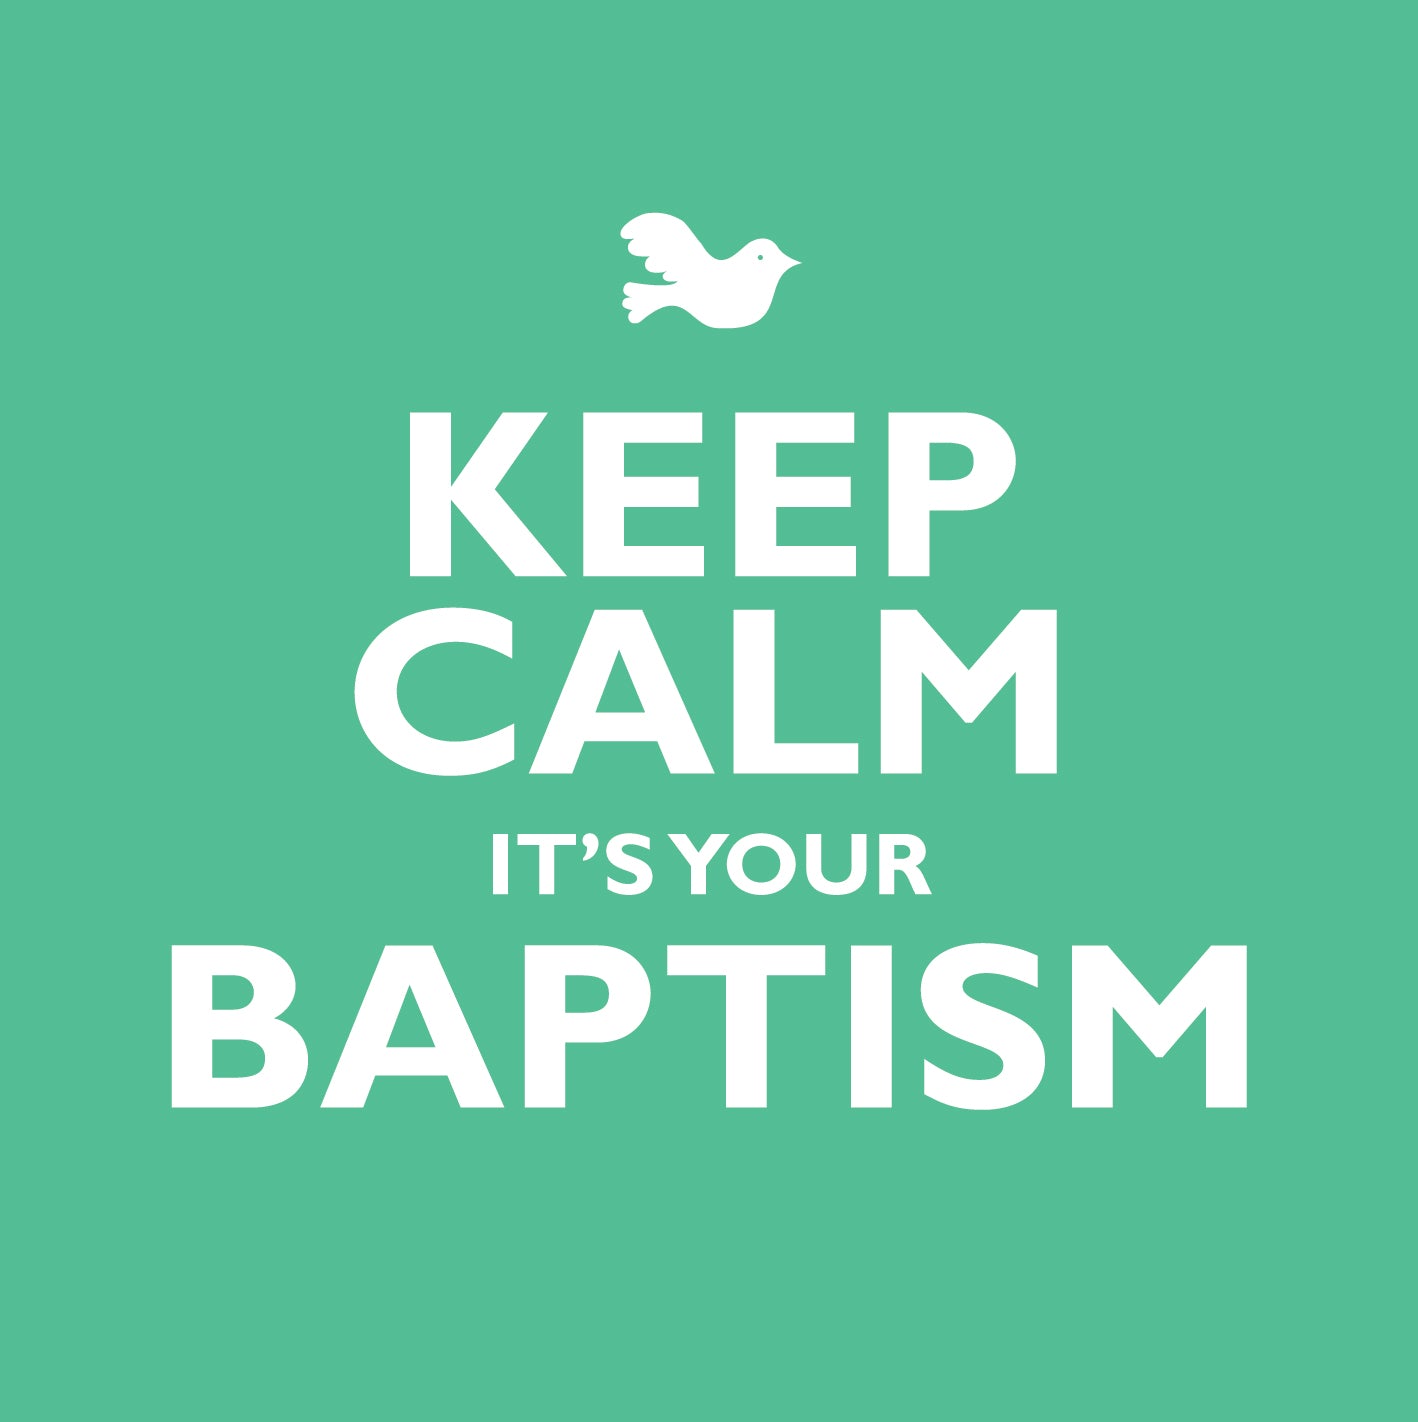 Keep Calm It's Your BaptismKeep Calm It's Your Baptism